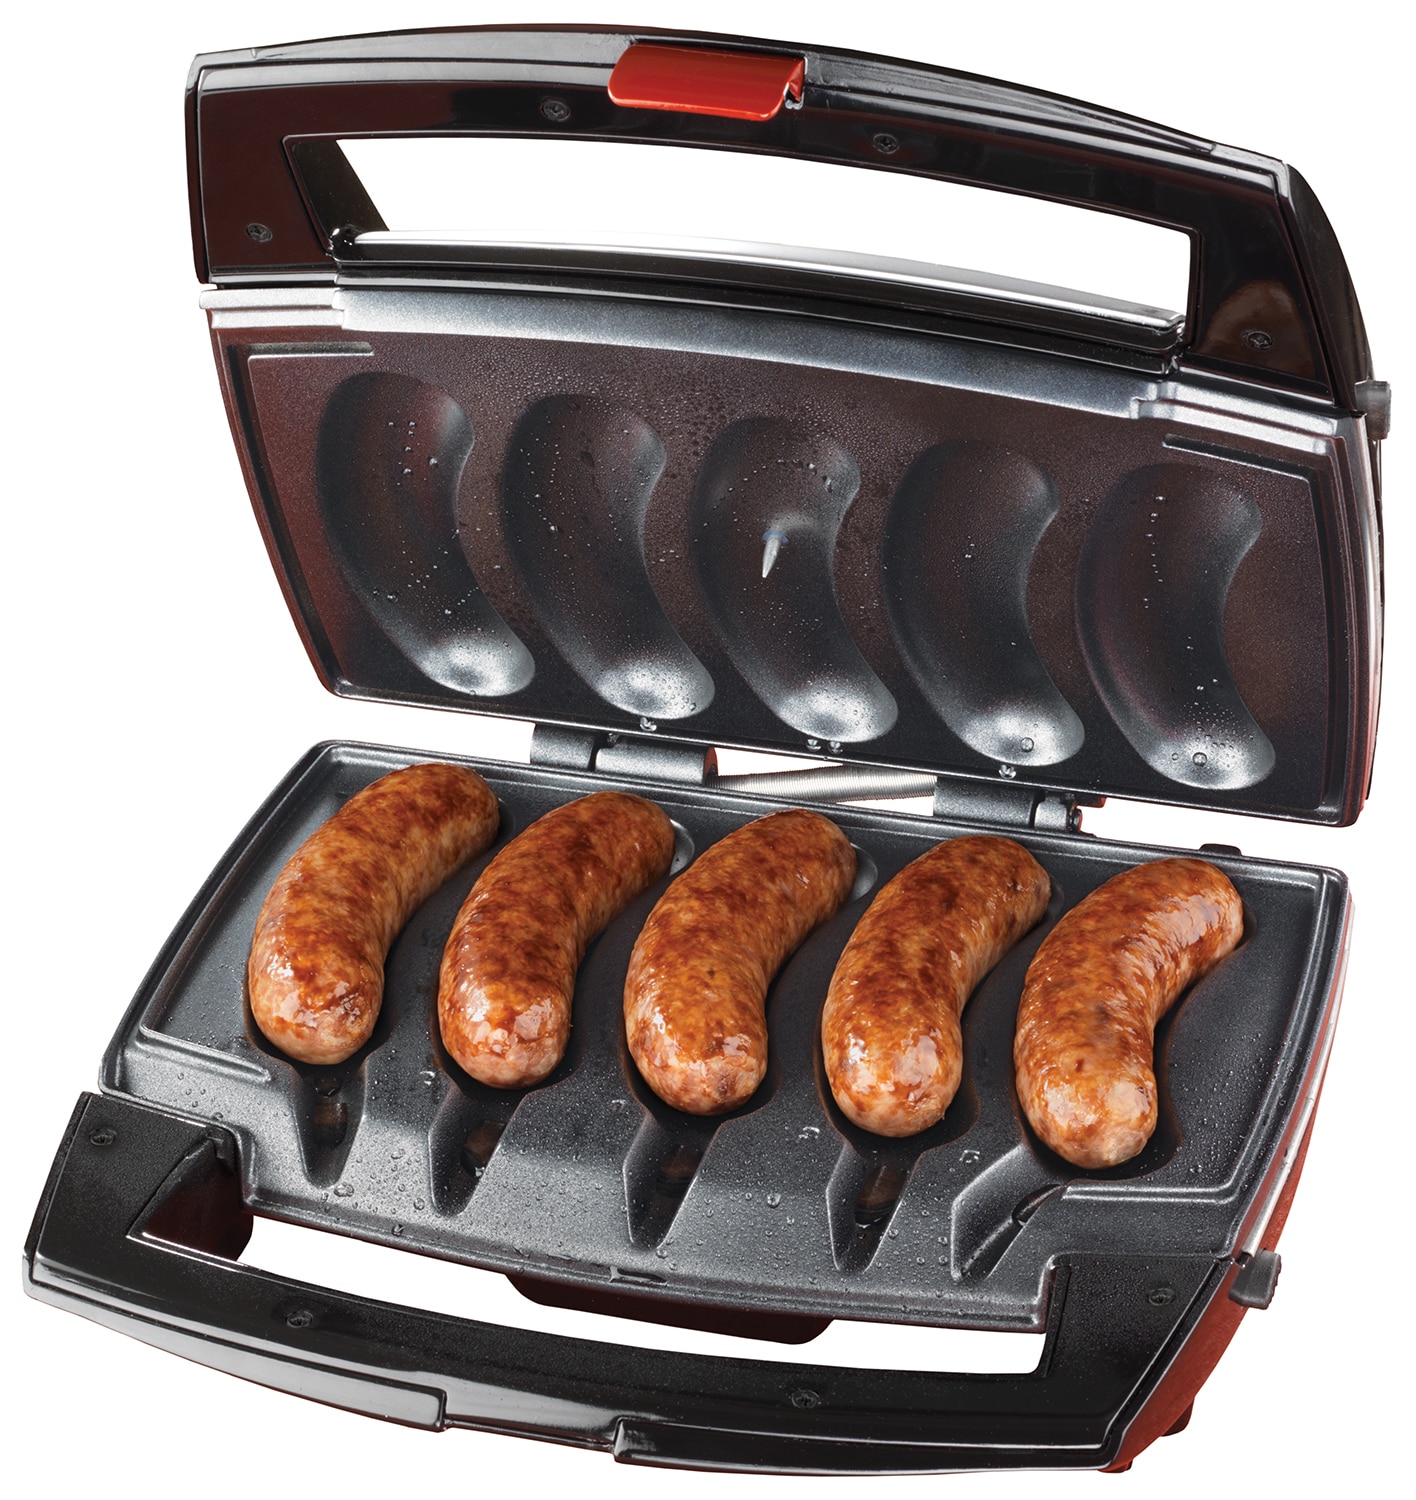 Midnight Snack Johnsonville Sizzling Sausage Grill Plus 